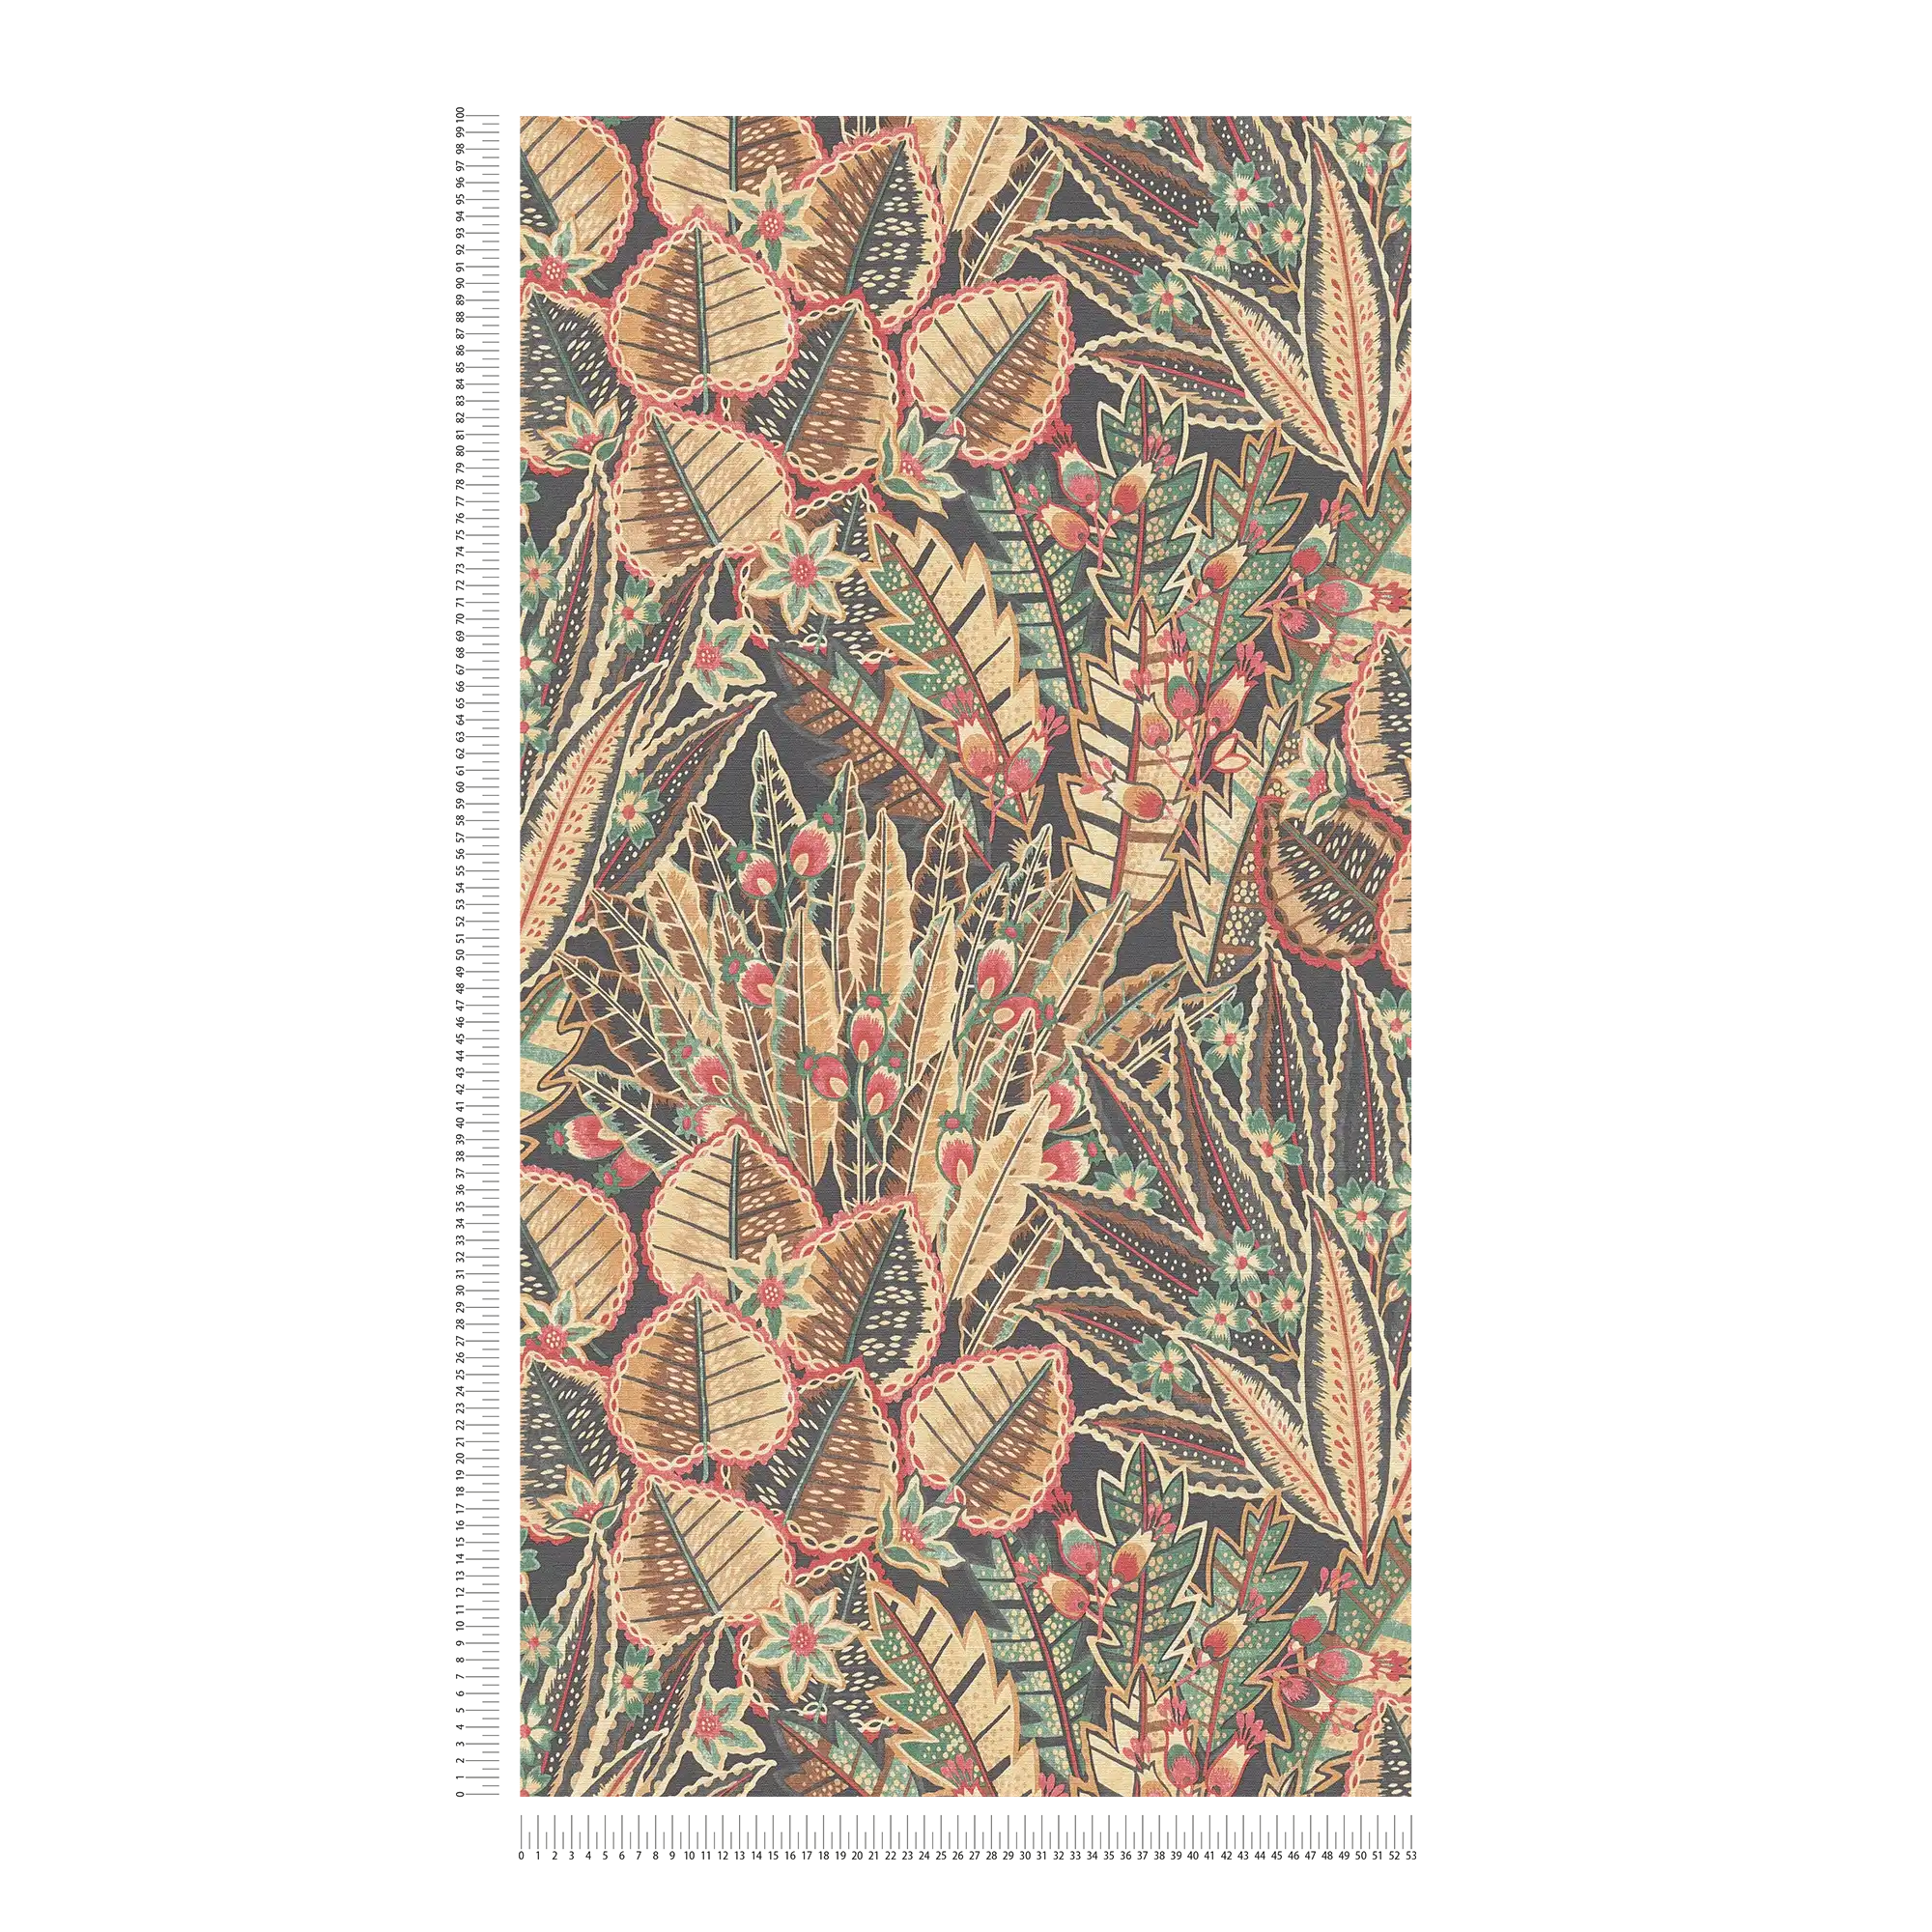             Floral non-woven wallpaper with abstract leaf pattern with red accents - brown, red, black
        